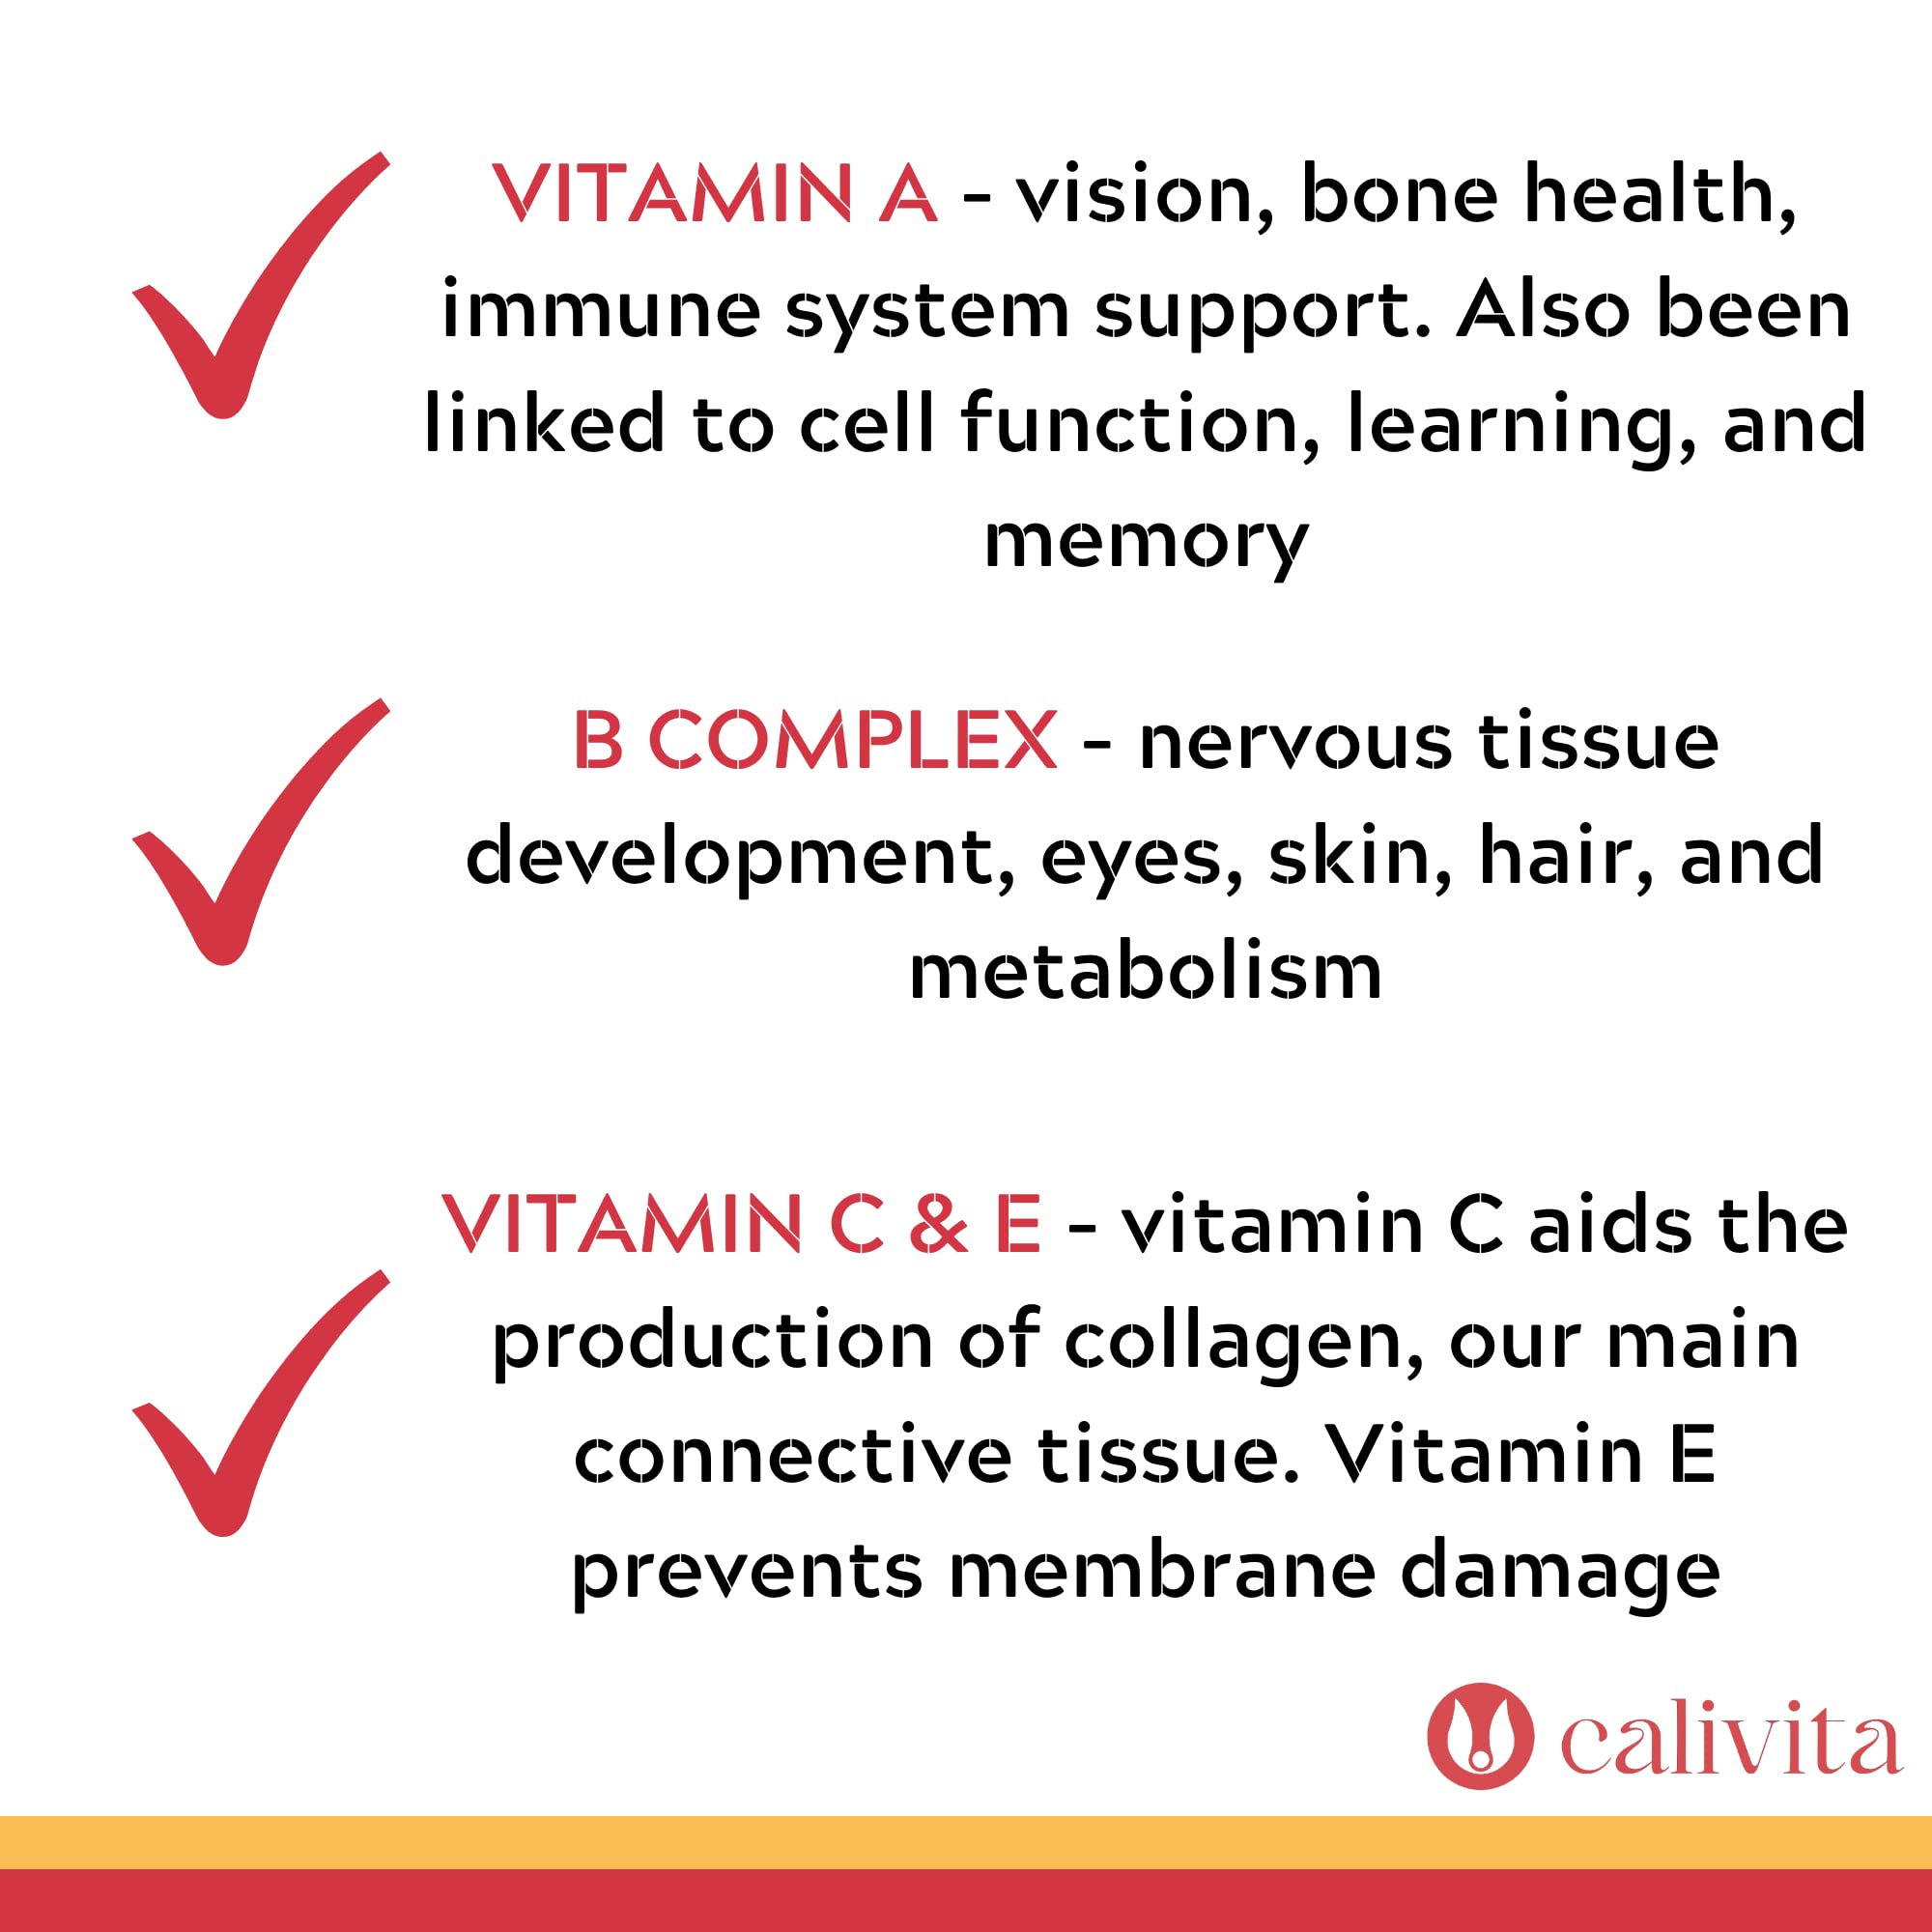 CaliVita PreSteps Daily Multivitamin Drops for Infants & Kids - Toddler Multivitamins with Vitamin A, B Complex, C, and E - Natural Orange Flavor - Sugar Free - 2 Month Supply - 60ml